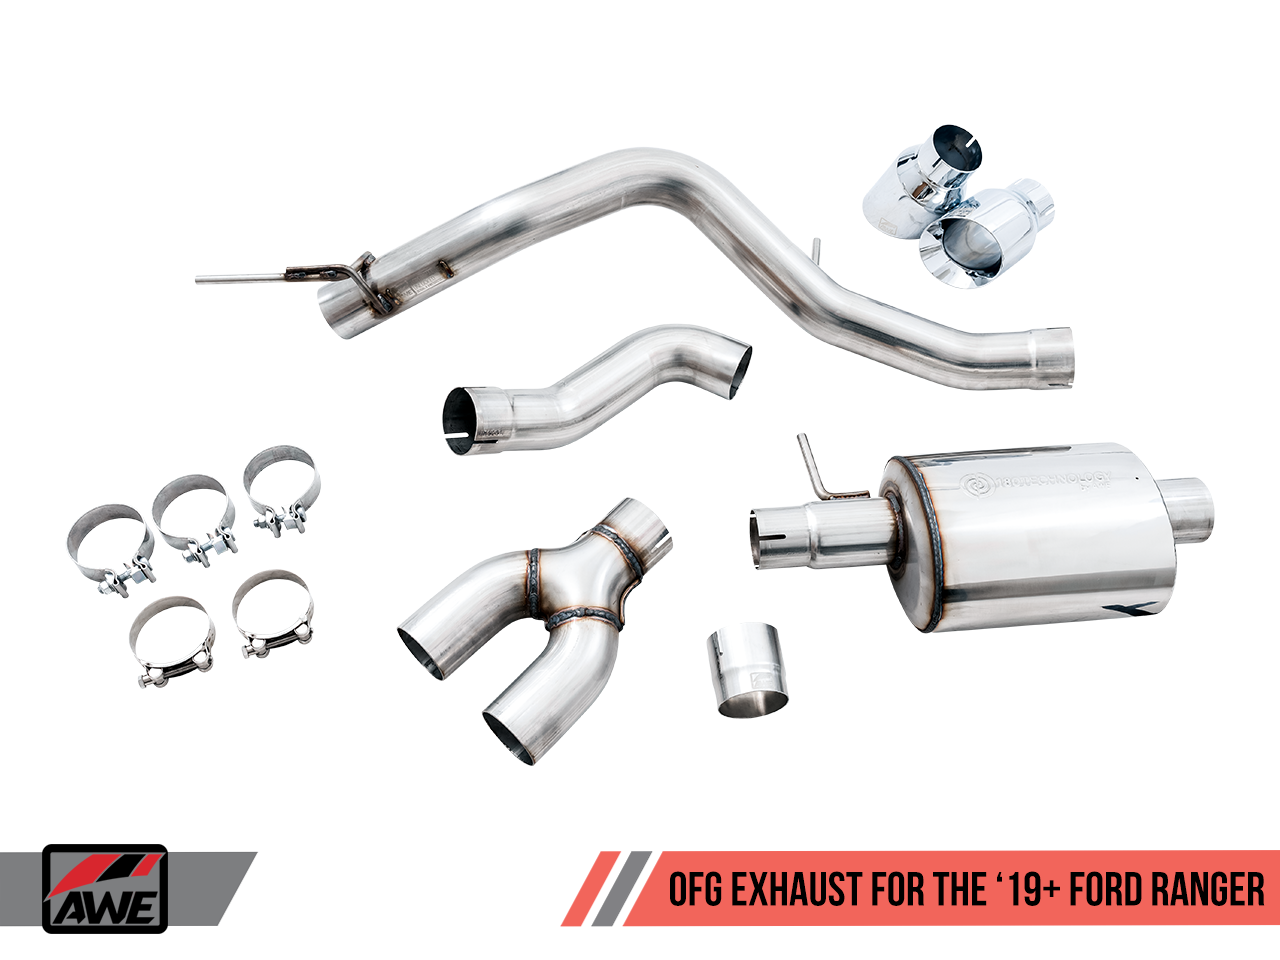 AWE Exhaust Suite for the '19+ Ford Ranger